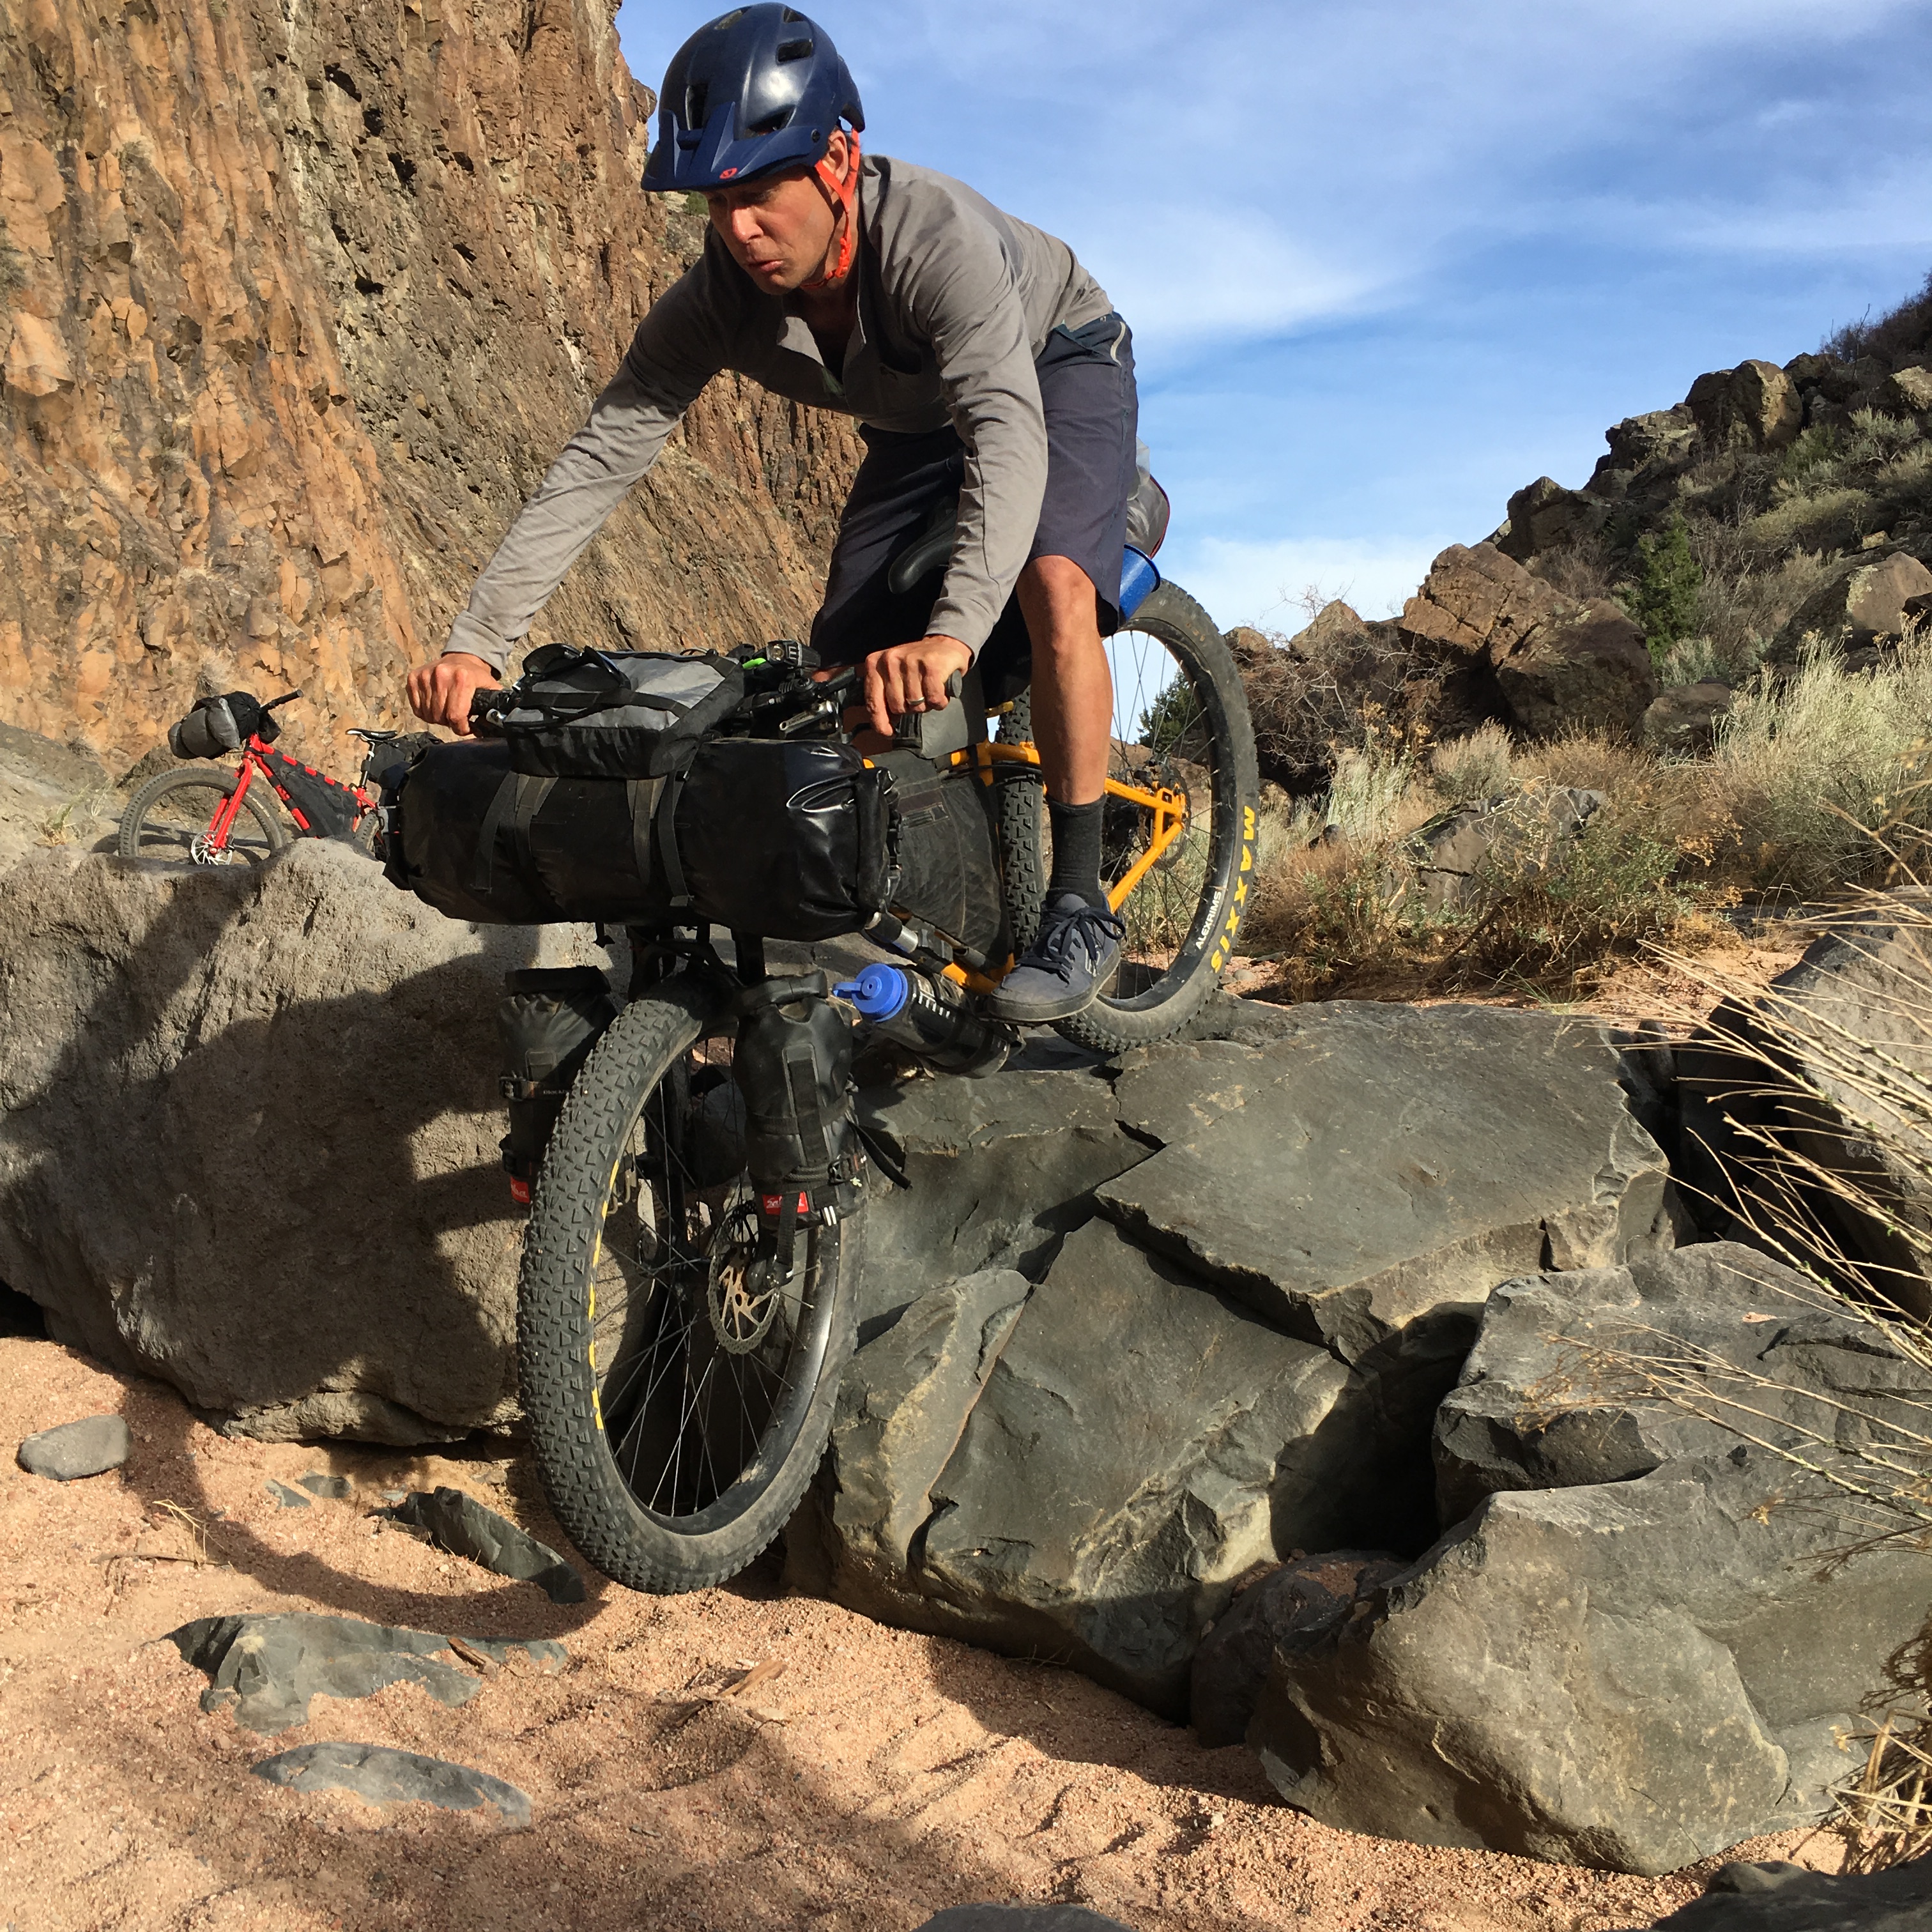 Front view of a cyclist, riding a Surly bike off of a rock in a desert canyon, with a red bike in the background